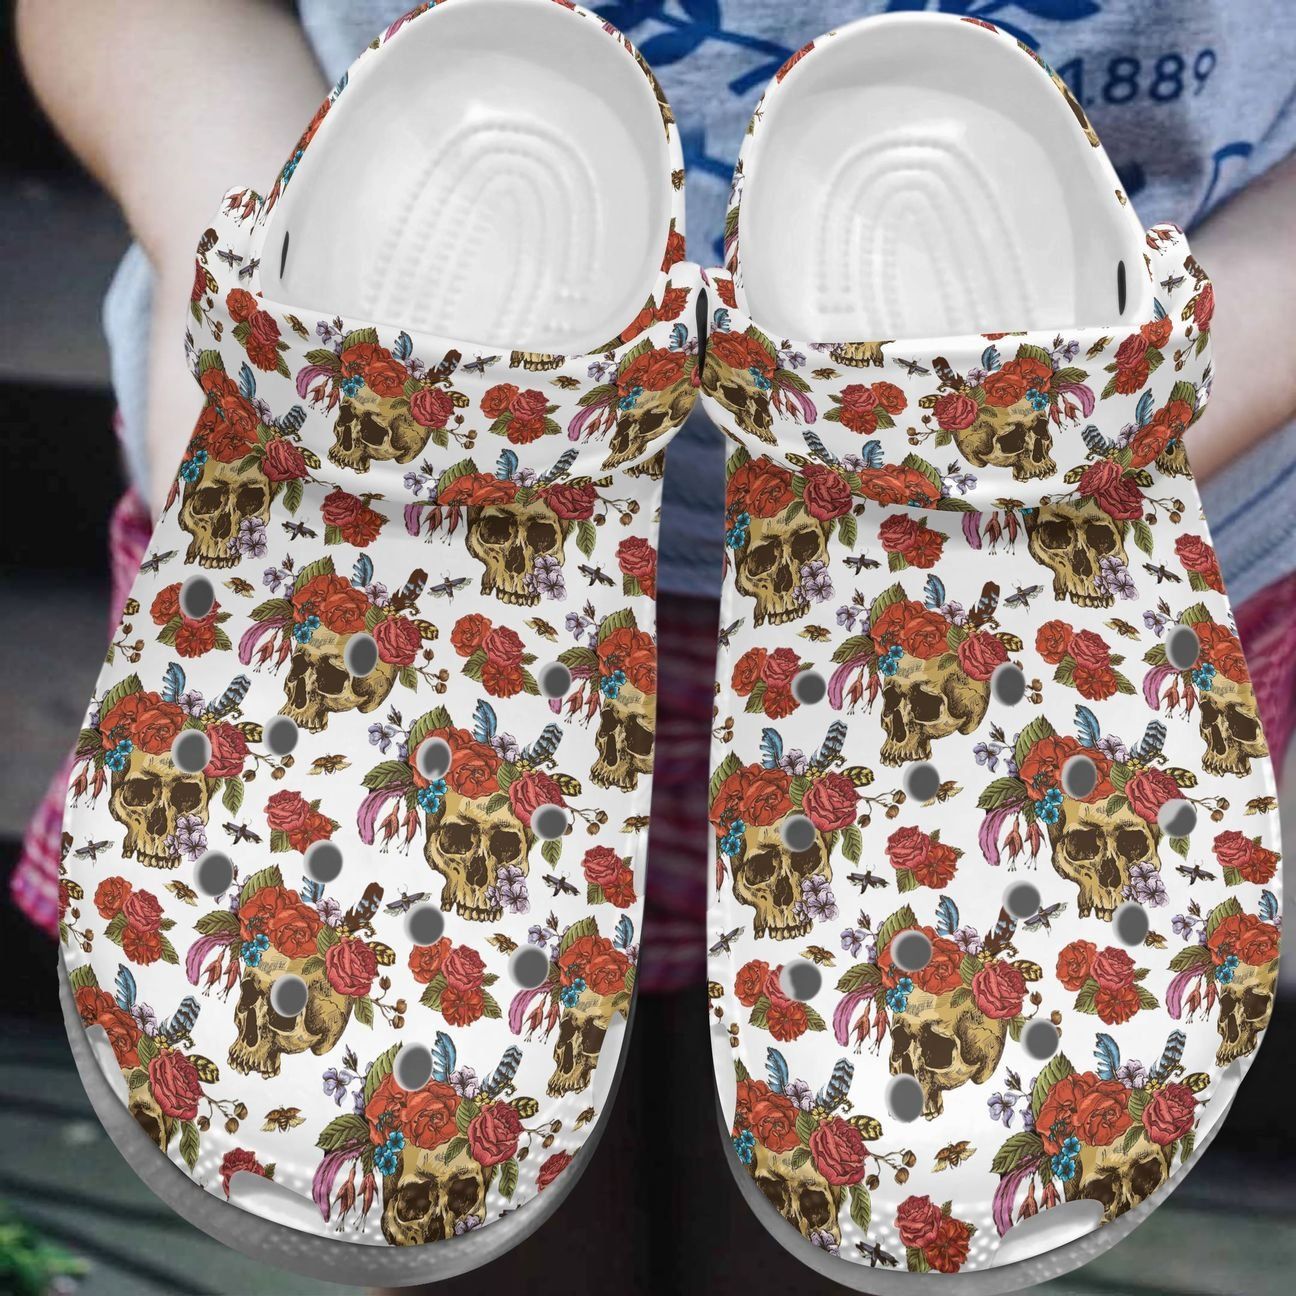 Skull Personalize Clog Custom Crocs Fashionstyle Comfortable For Women Men Kid Print 3D Skull And Flowers